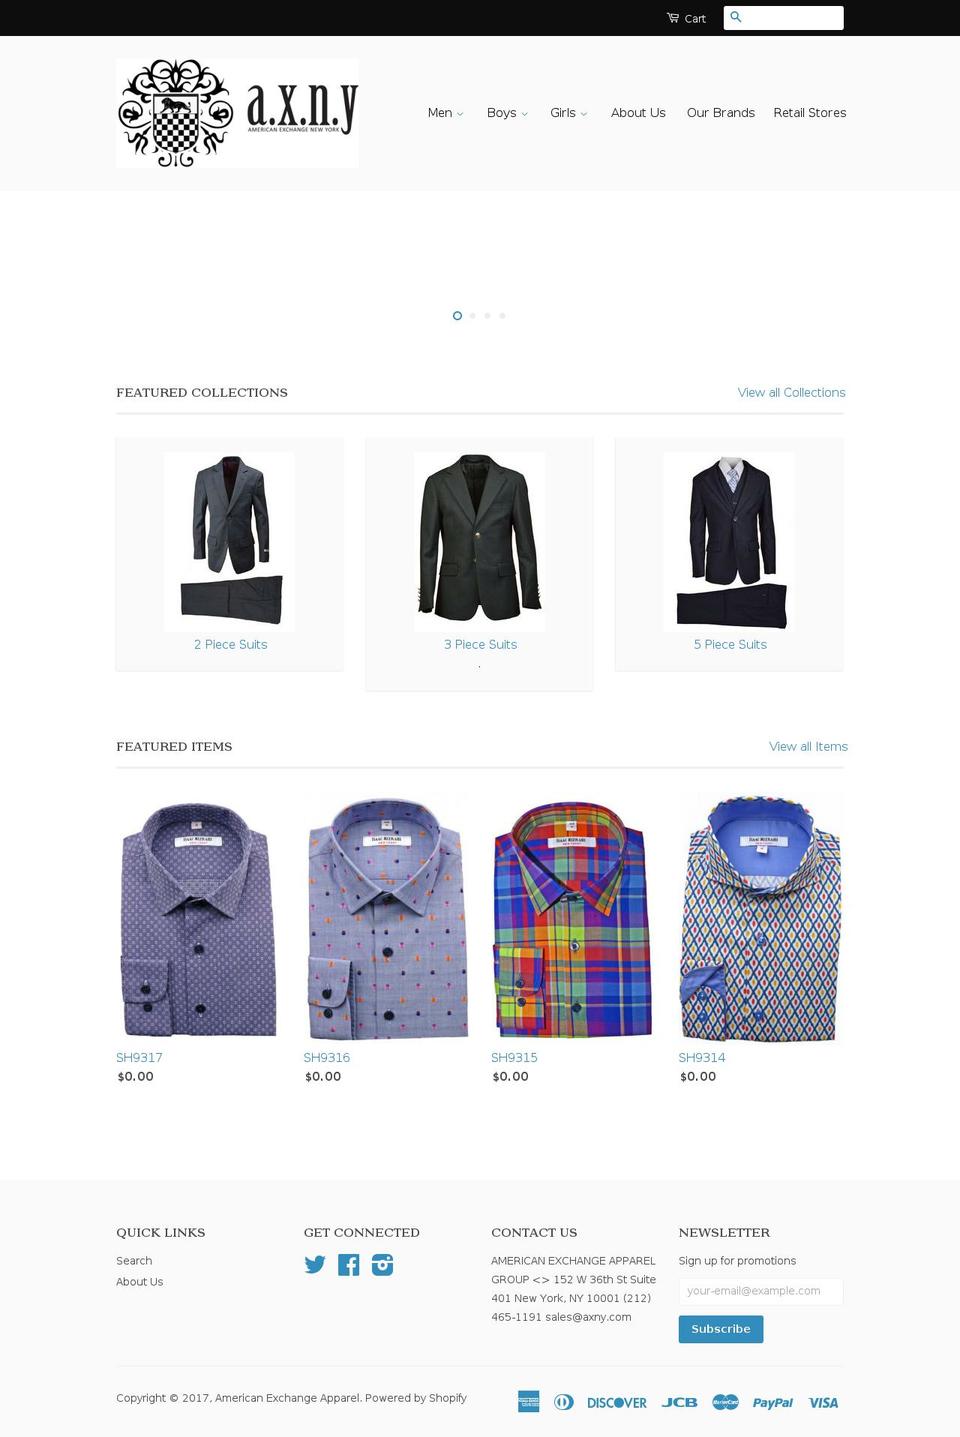 Simple Shopify theme site example axny.com